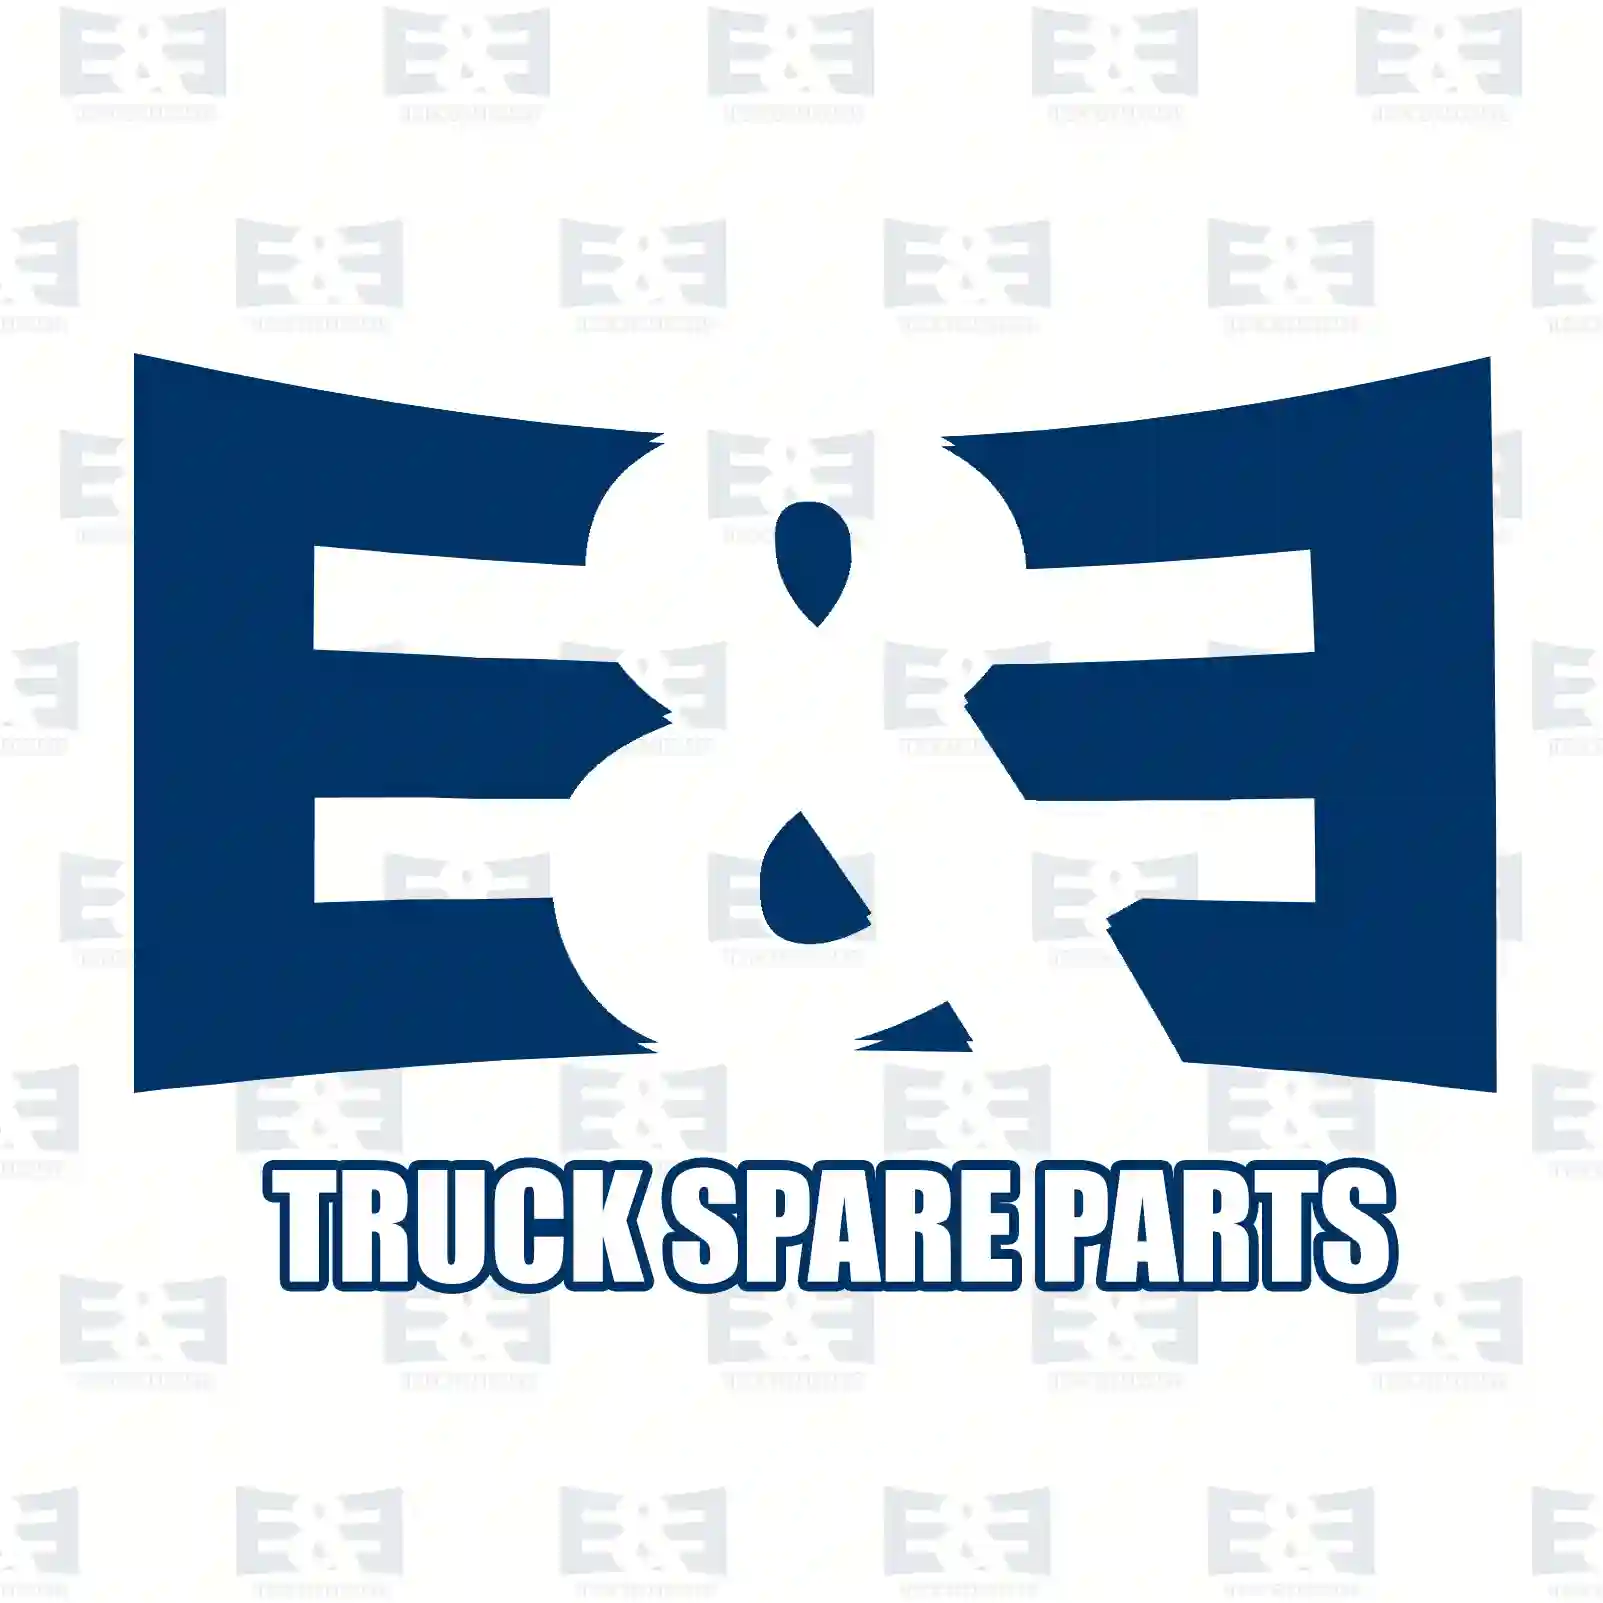  Shock absorber, rear || E&E Truck Spare Parts | Truck Spare Parts, Auotomotive Spare Parts